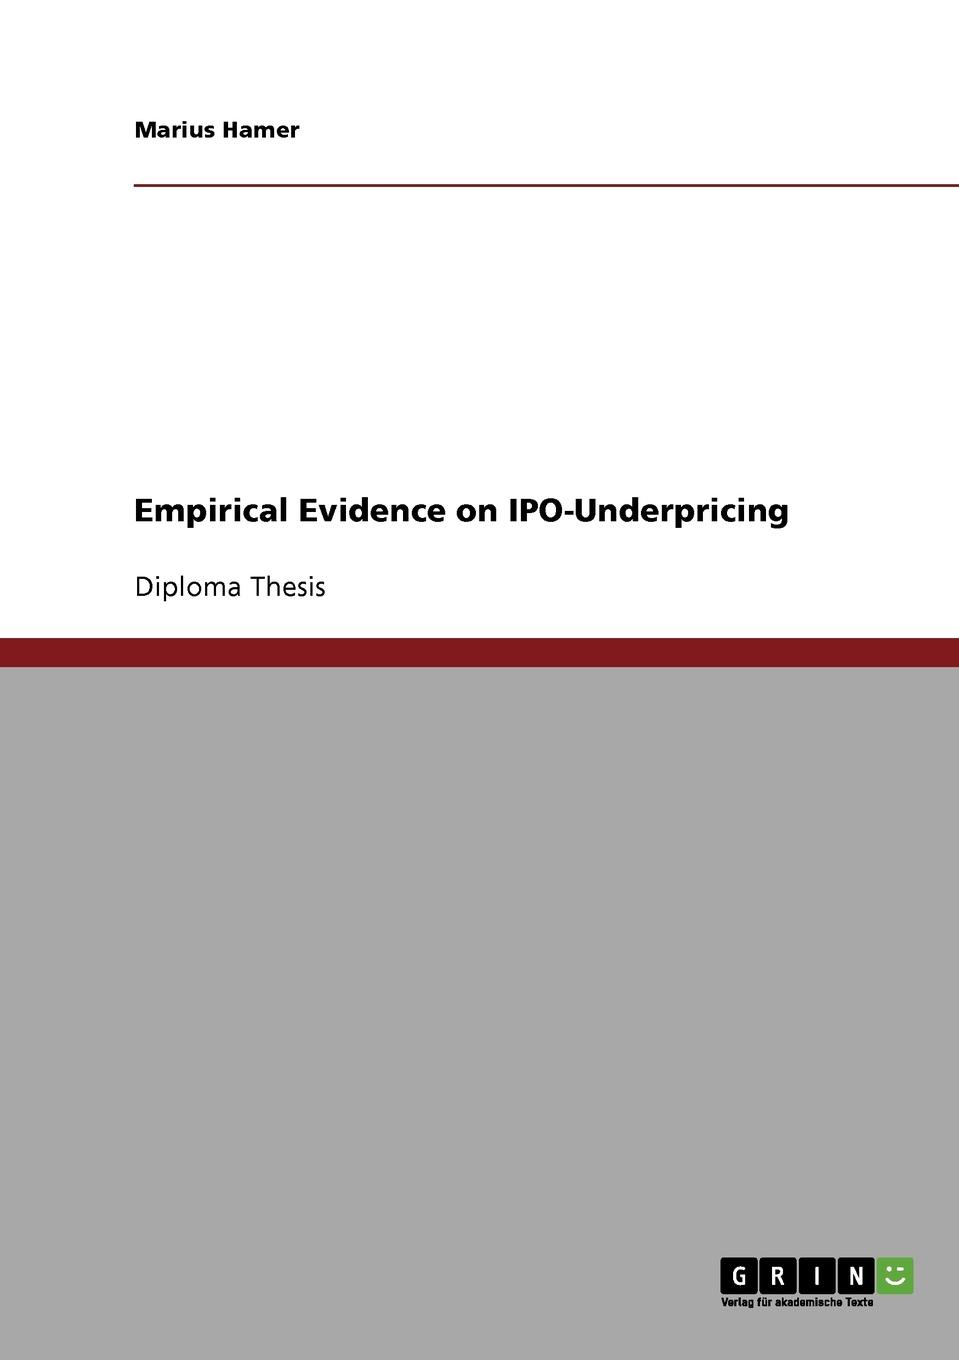 Empirical Evidence on IPO-Underpricing